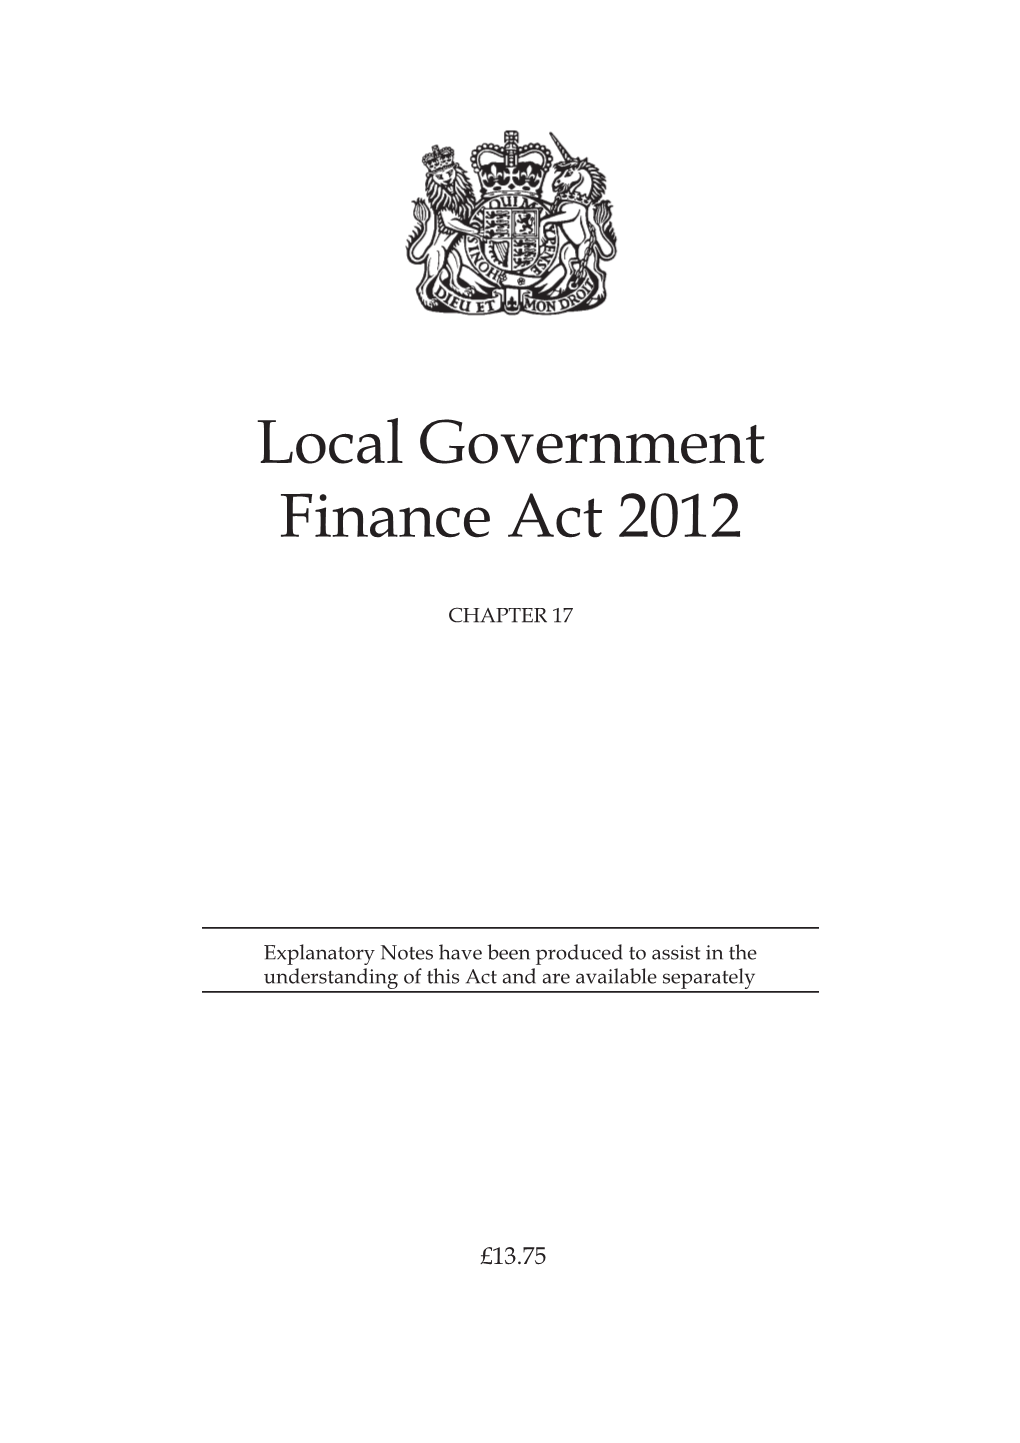 Local Government Finance Act 2012